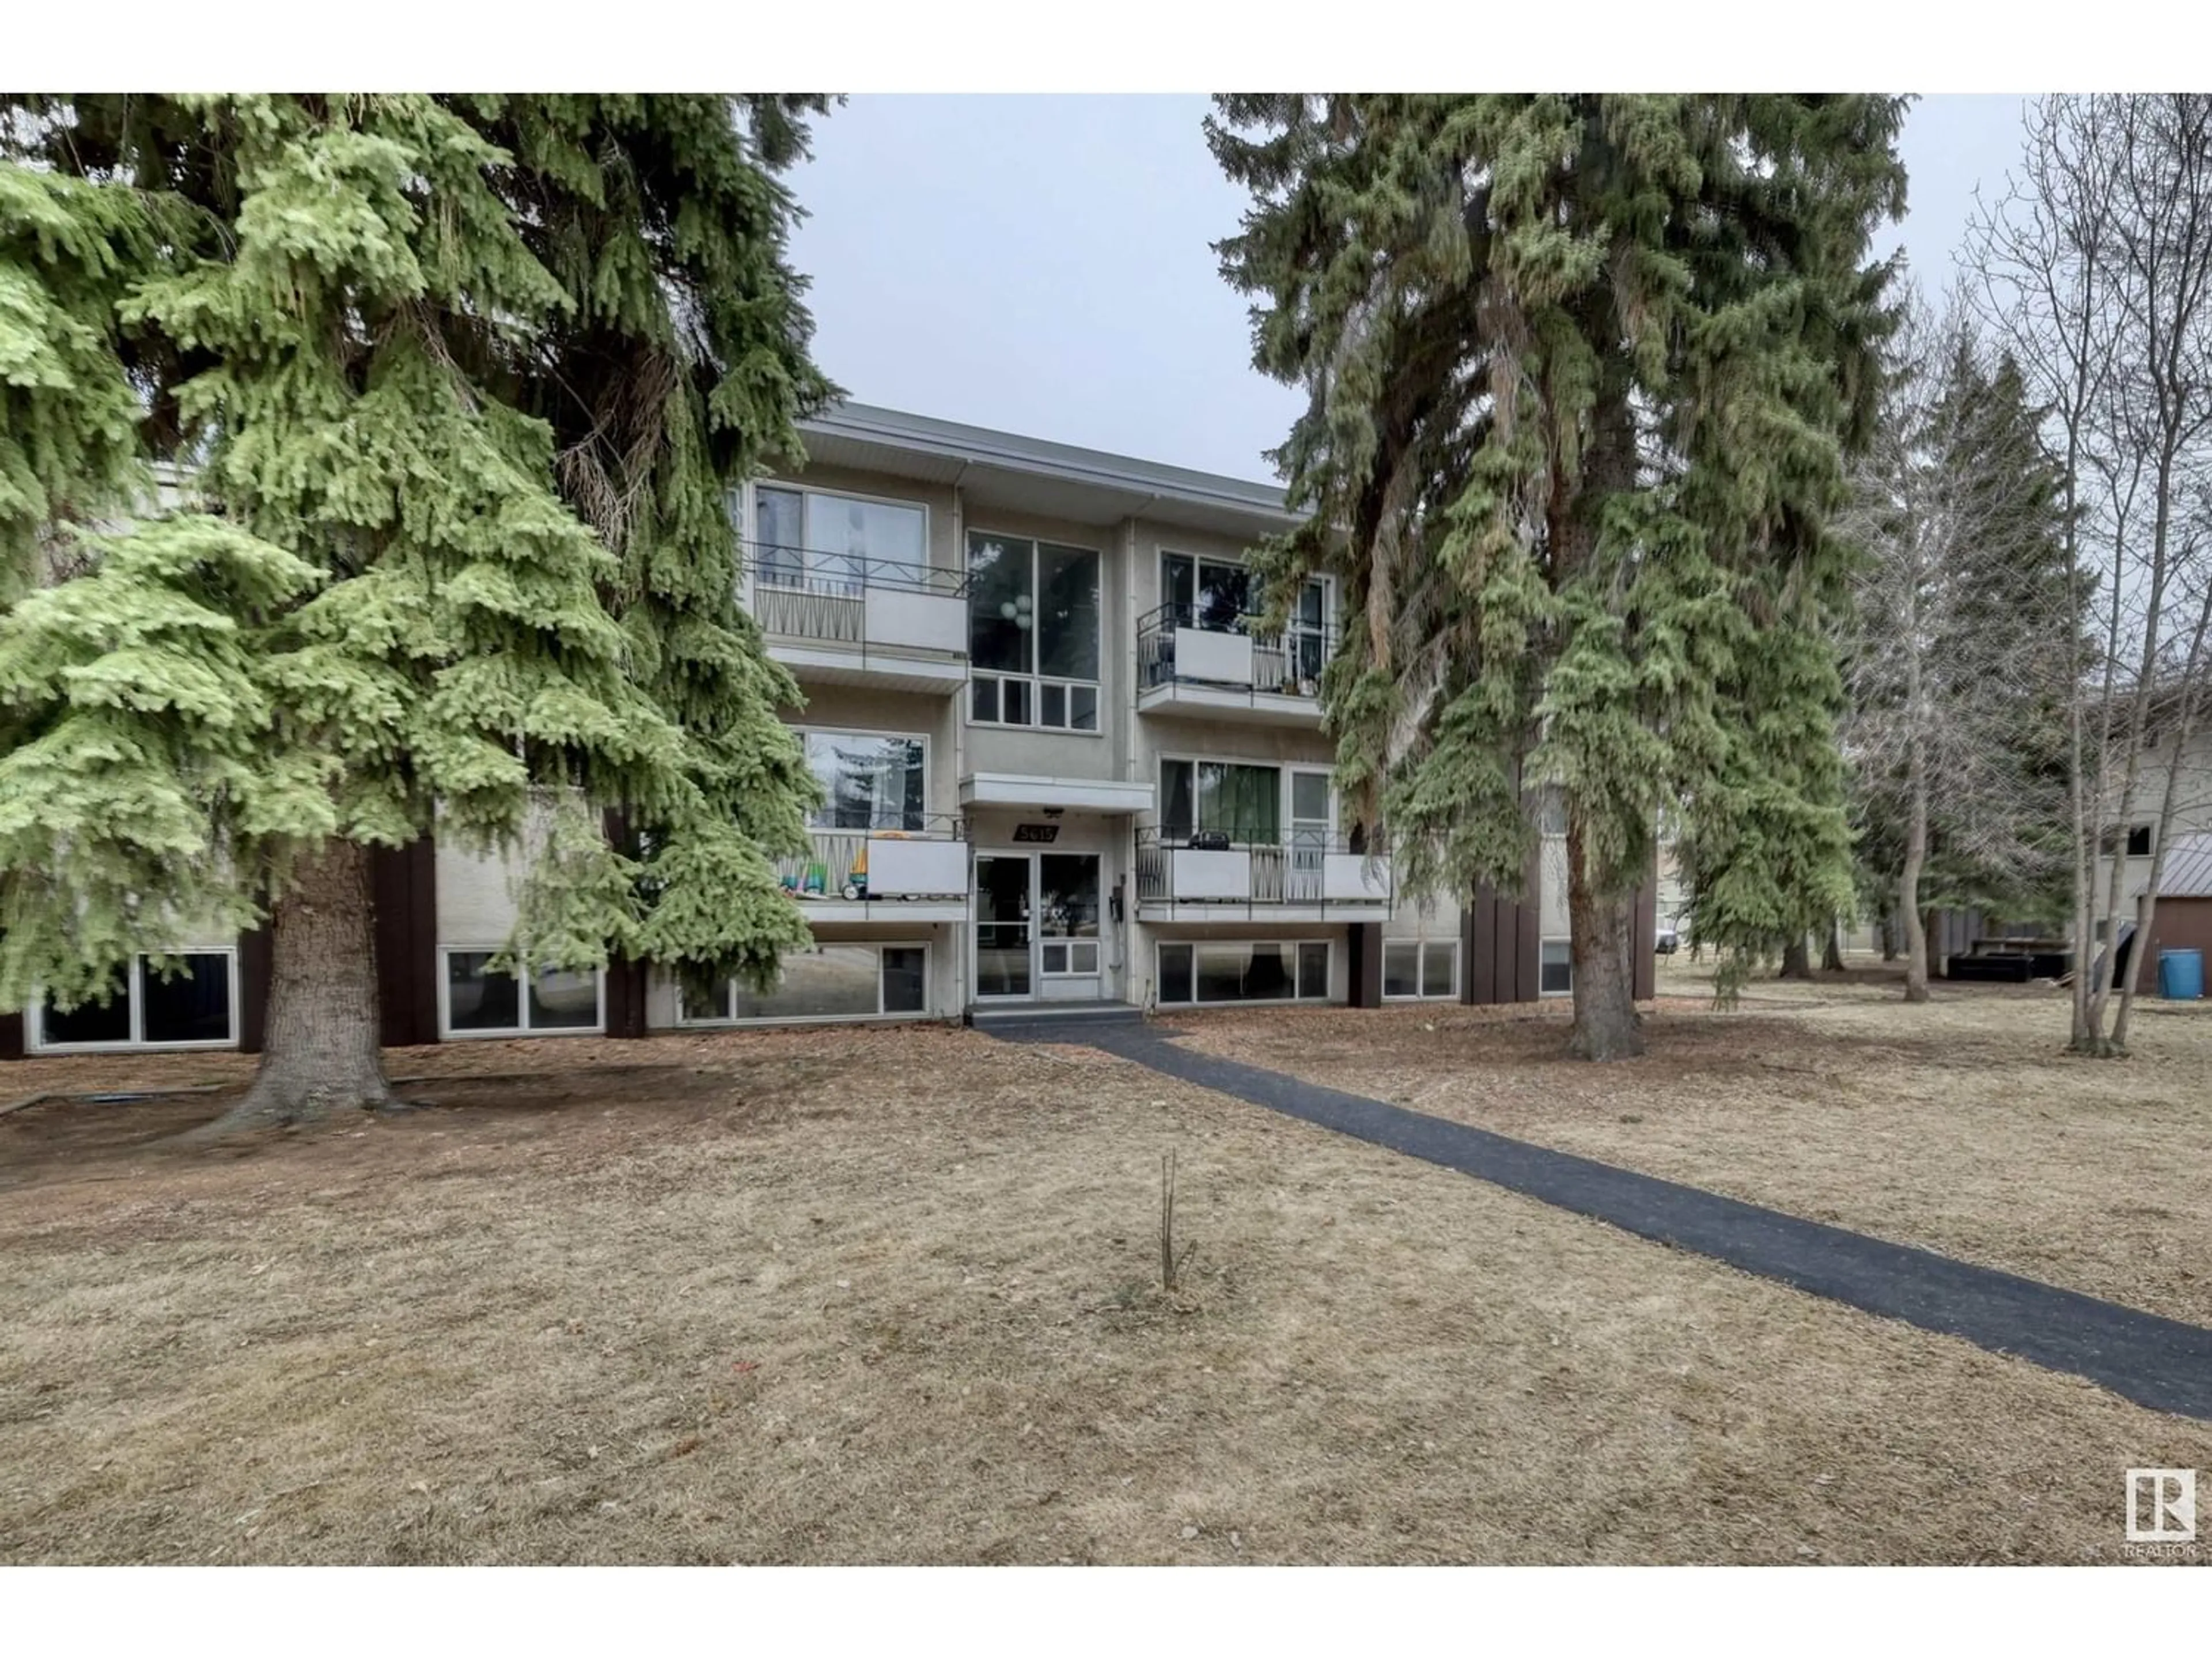 A pic from exterior of the house or condo for #60 5615 105 ST NW, Edmonton Alberta T6H2N2